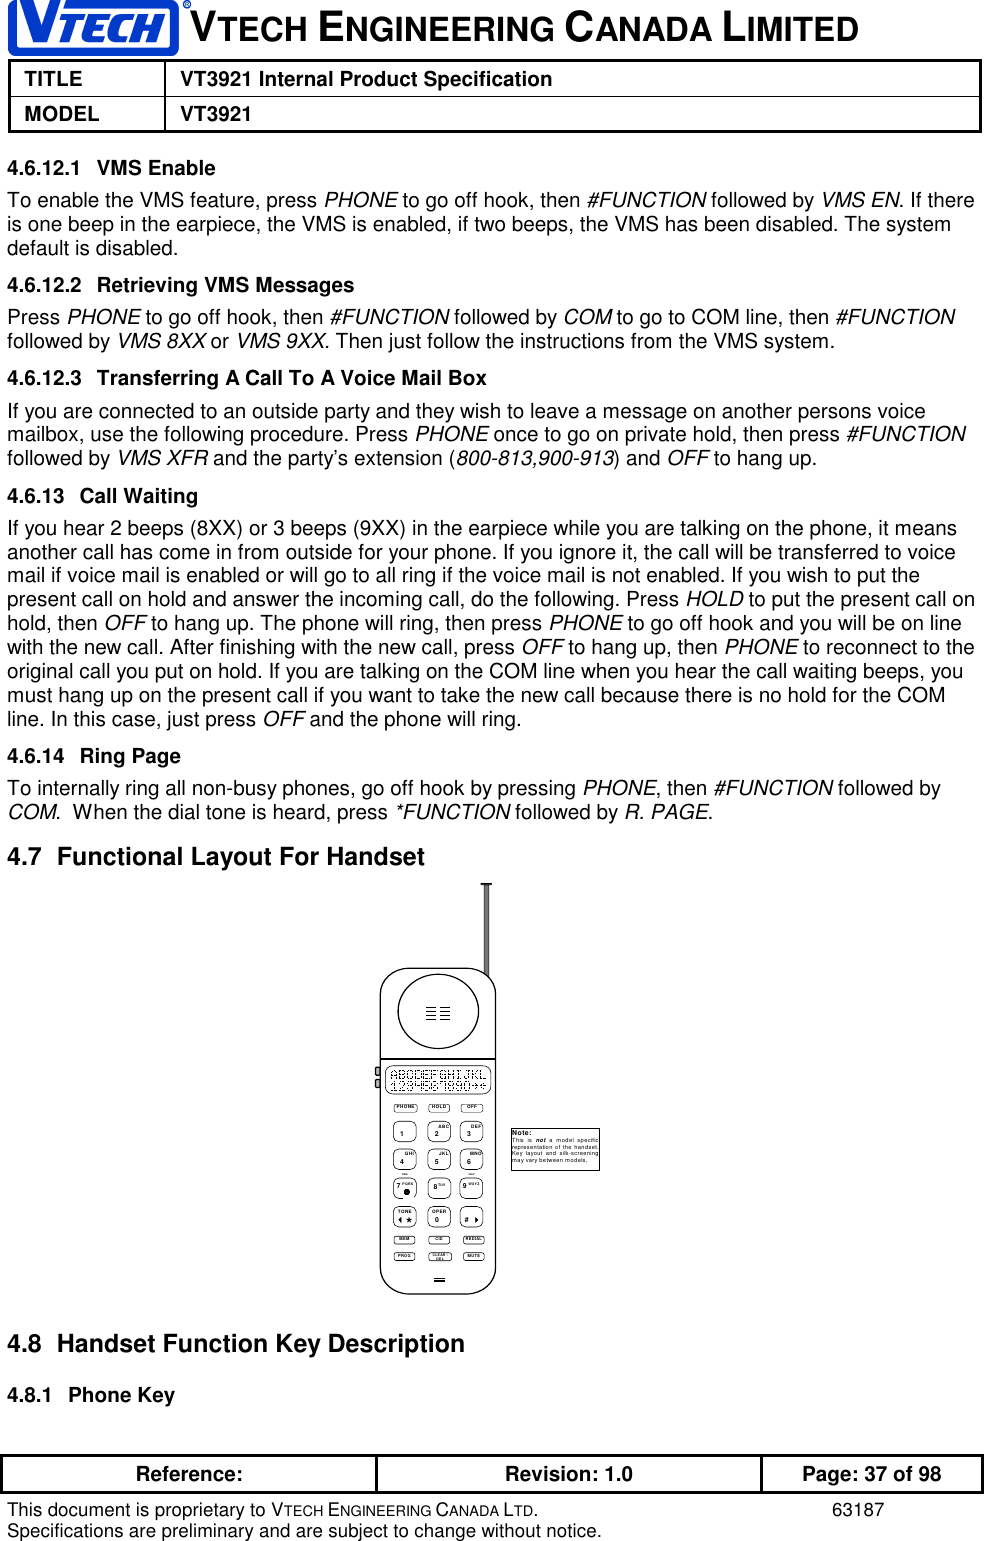 VTECH ENGINEERING CANADA LIMITEDTITLE VT3921 Internal Product SpecificationMODEL VT3921Reference: Revision: 1.0 Page: 37 of 98This document is proprietary to VTECH ENGINEERING CANADA LTD. 63187Specifications are preliminary and are subject to change without notice.4.6.12.1 VMS EnableTo enable the VMS feature, press PHONE to go off hook, then #FUNCTION followed by VMS EN. If thereis one beep in the earpiece, the VMS is enabled, if two beeps, the VMS has been disabled. The systemdefault is disabled.4.6.12.2  Retrieving VMS MessagesPress PHONE to go off hook, then #FUNCTION followed by COM to go to COM line, then #FUNCTIONfollowed by VMS 8XX or VMS 9XX. Then just follow the instructions from the VMS system.4.6.12.3  Transferring A Call To A Voice Mail BoxIf you are connected to an outside party and they wish to leave a message on another persons voicemailbox, use the following procedure. Press PHONE once to go on private hold, then press #FUNCTIONfollowed by VMS XFR and the party’s extension (800-813,900-913) and OFF to hang up.4.6.13 Call WaitingIf you hear 2 beeps (8XX) or 3 beeps (9XX) in the earpiece while you are talking on the phone, it meansanother call has come in from outside for your phone. If you ignore it, the call will be transferred to voicemail if voice mail is enabled or will go to all ring if the voice mail is not enabled. If you wish to put thepresent call on hold and answer the incoming call, do the following. Press HOLD to put the present call onhold, then OFF to hang up. The phone will ring, then press PHONE to go off hook and you will be on linewith the new call. After finishing with the new call, press OFF to hang up, then PHONE to reconnect to theoriginal call you put on hold. If you are talking on the COM line when you hear the call waiting beeps, youmust hang up on the present call if you want to take the new call because there is no hold for the COMline. In this case, just press OFF and the phone will ring.4.6.14 Ring PageTo internally ring all non-busy phones, go off hook by pressing PHONE, then #FUNCTION followed byCOM.  When the dial tone is heard, press *FUNCTION followed by R. PAGE.4.7  Functional Layout For Handset5JKL6MNO4GHI8TUV2ABC3DEF1...*TONE#0OPERMEMHOLDPHONE OFFCLEAR /DELTIME7 PQRSVIEW9 WXYZPROGCID REDIALMUTENote:This is not a m odel specif icrepresentation of the handset.Key layout and silk-screeningmay vary between models,4.8  Handset Function Key Description4.8.1 Phone Key